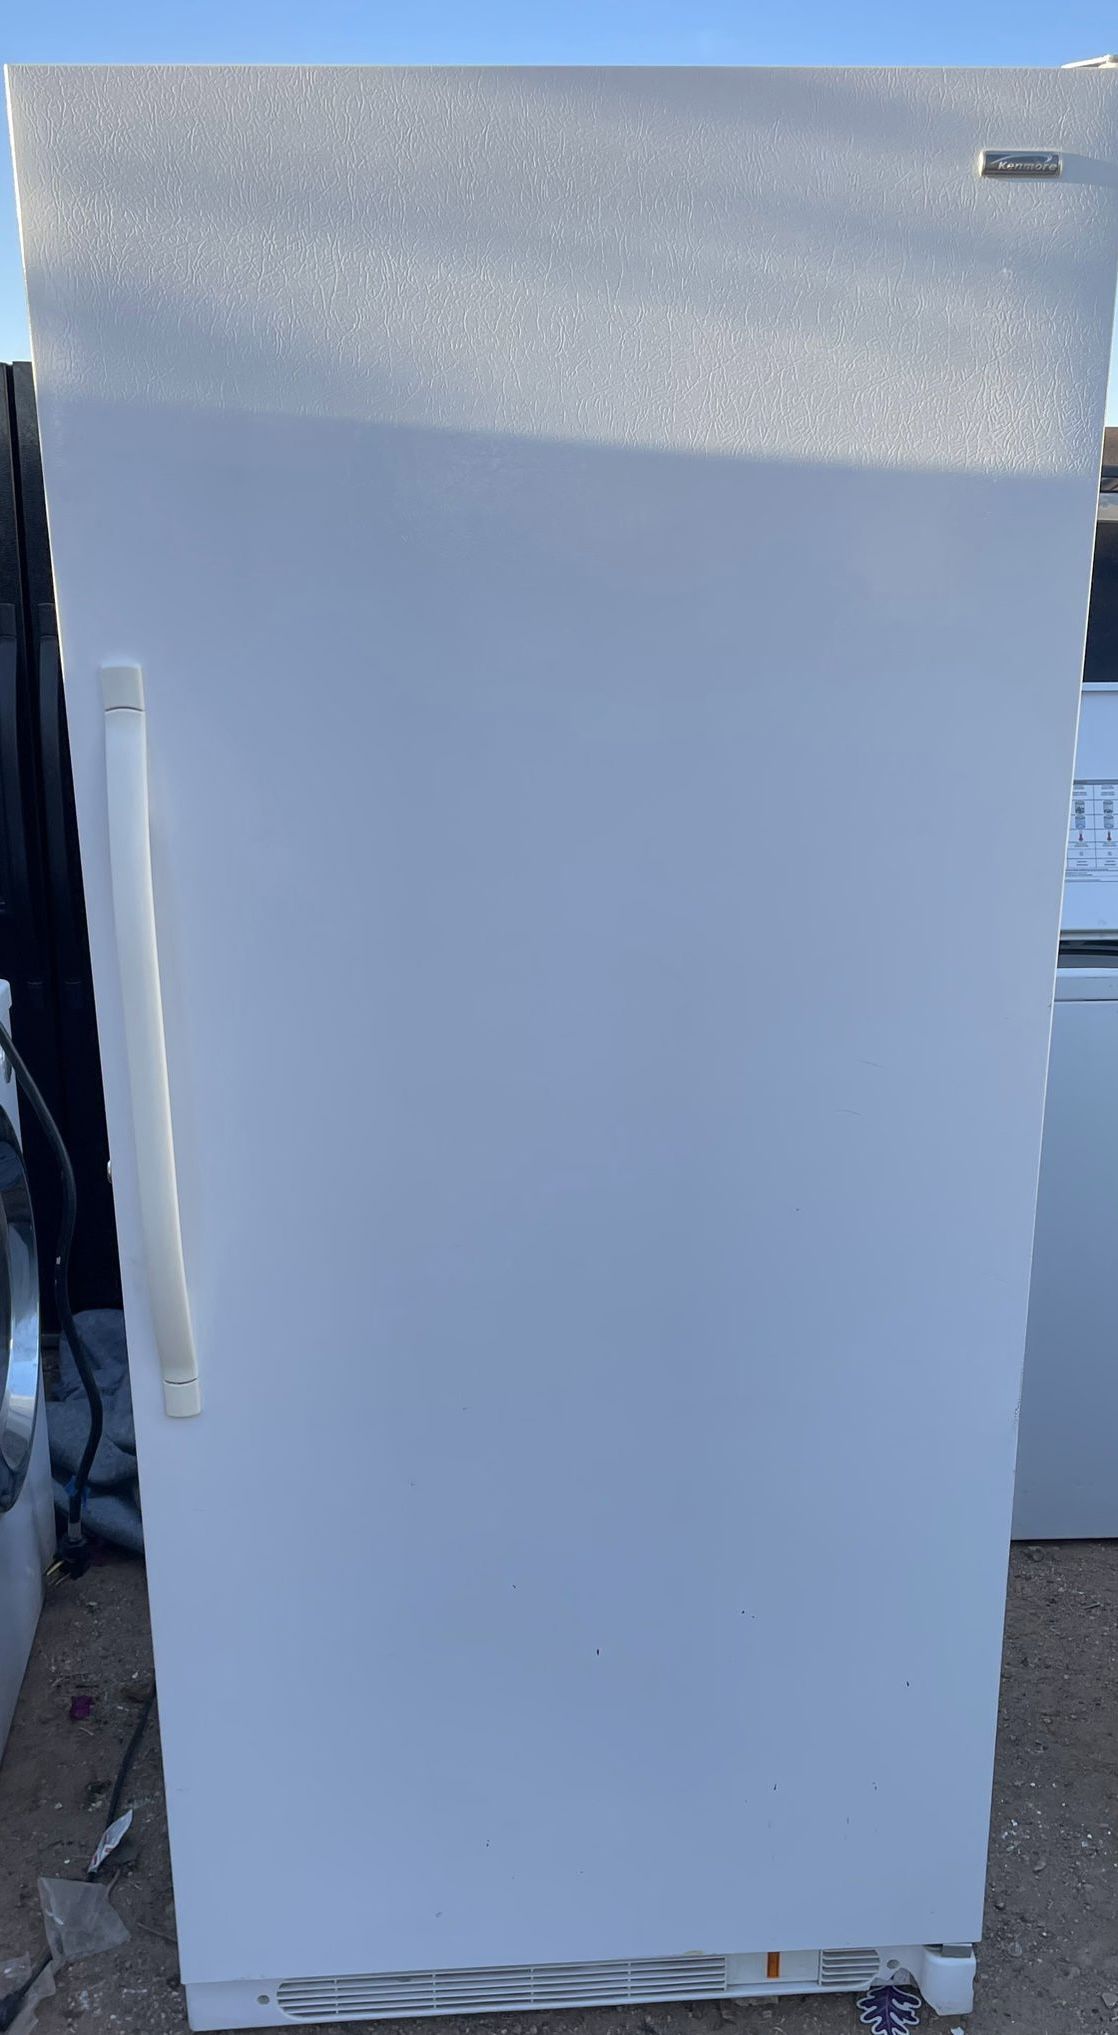 Freezer Two Months Warranty Delivery 